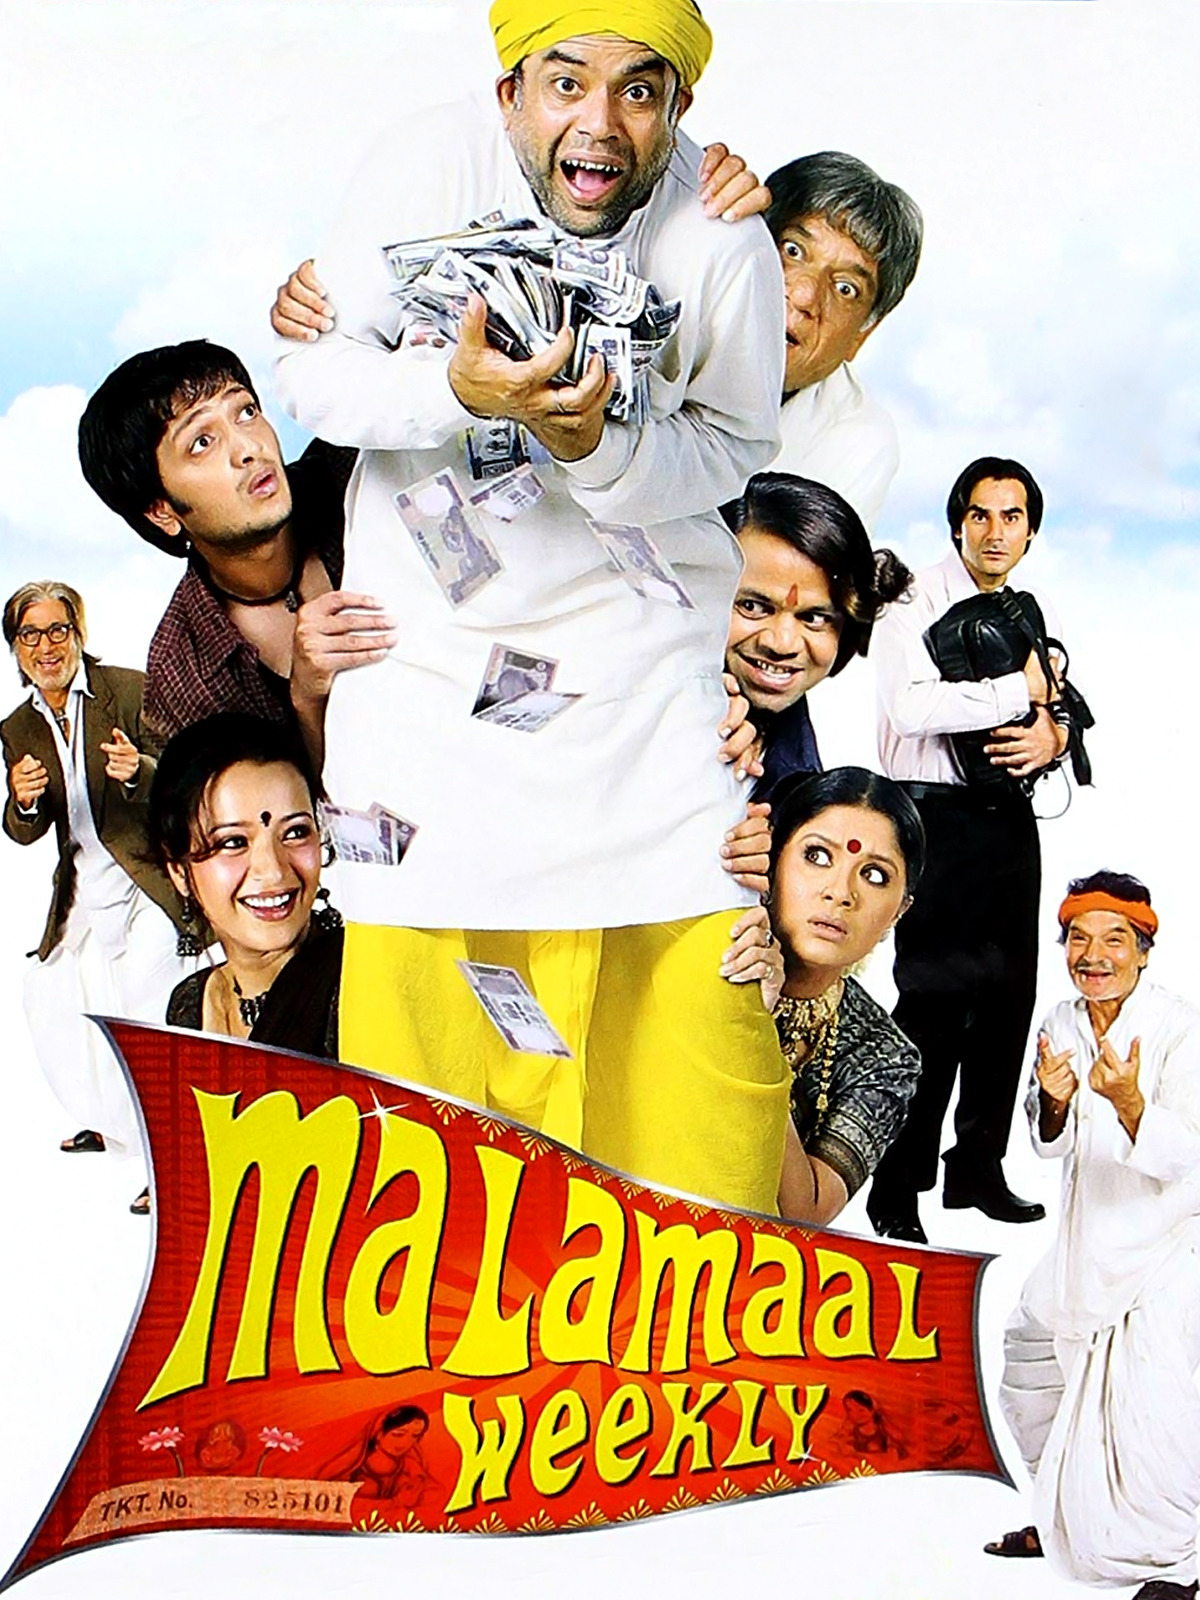 You are currently viewing Top 3 Underrated Bollywood Comedy Movies.